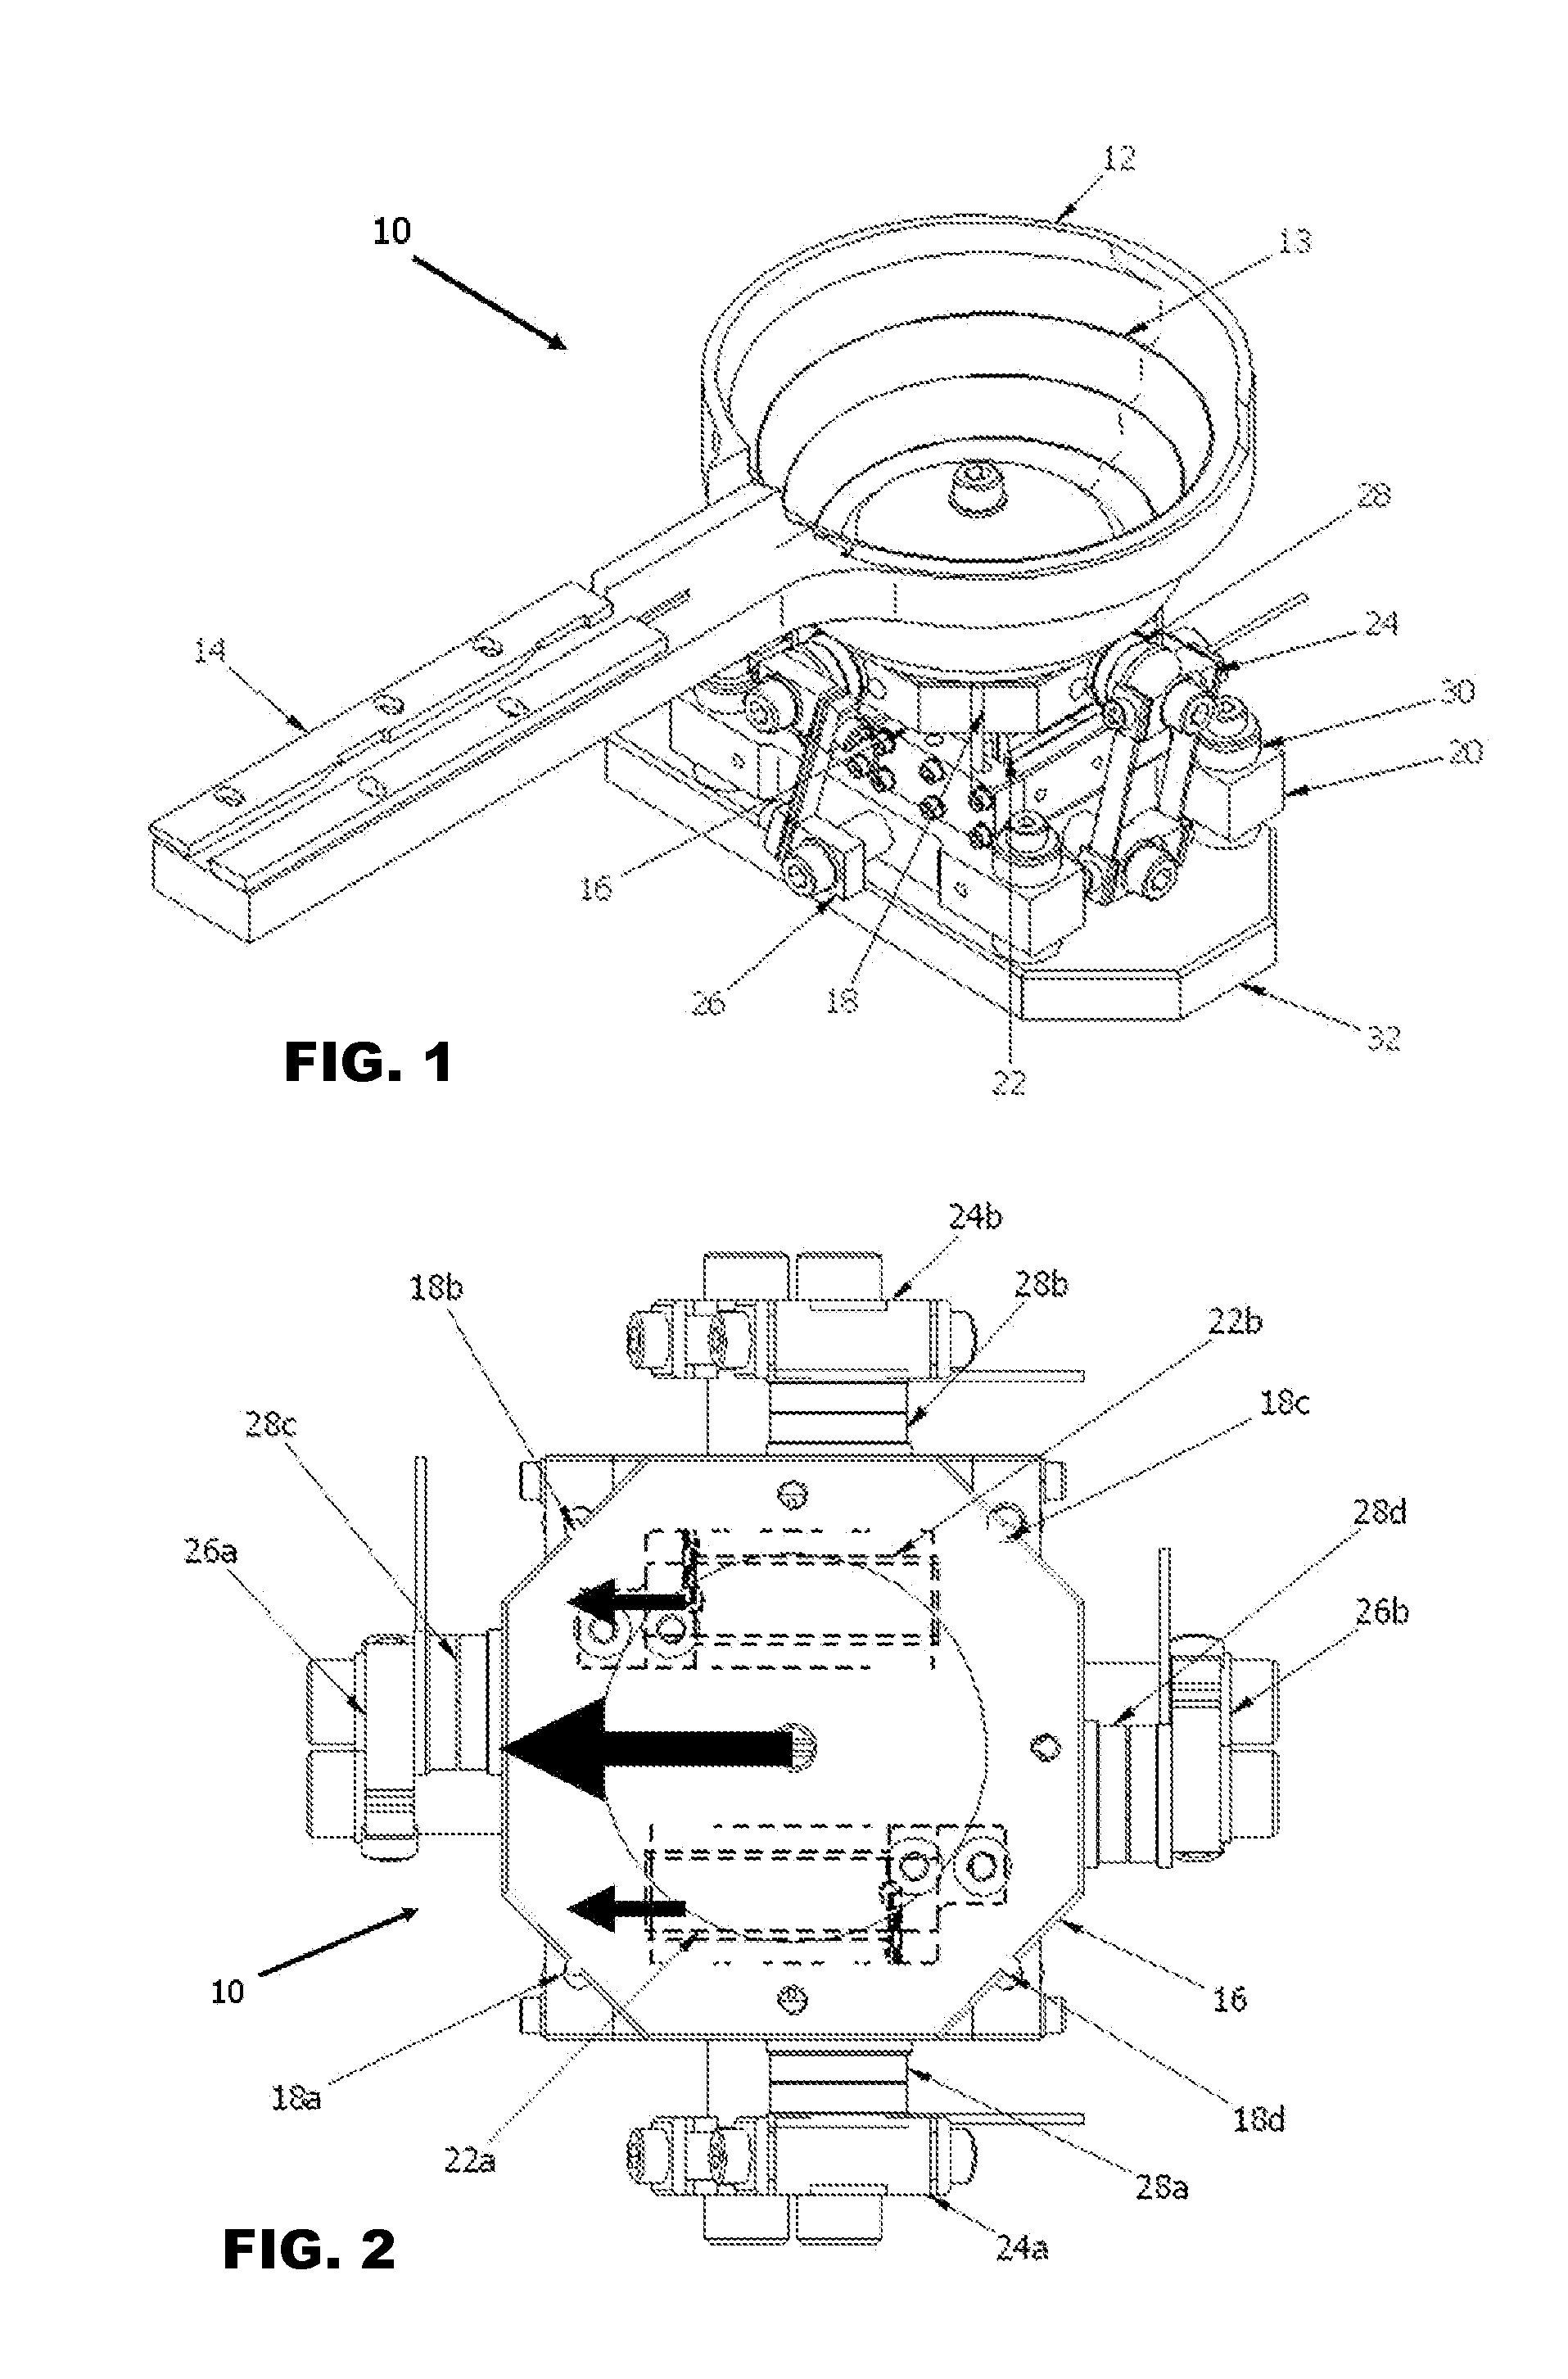 Vibratory feeder for conveying components